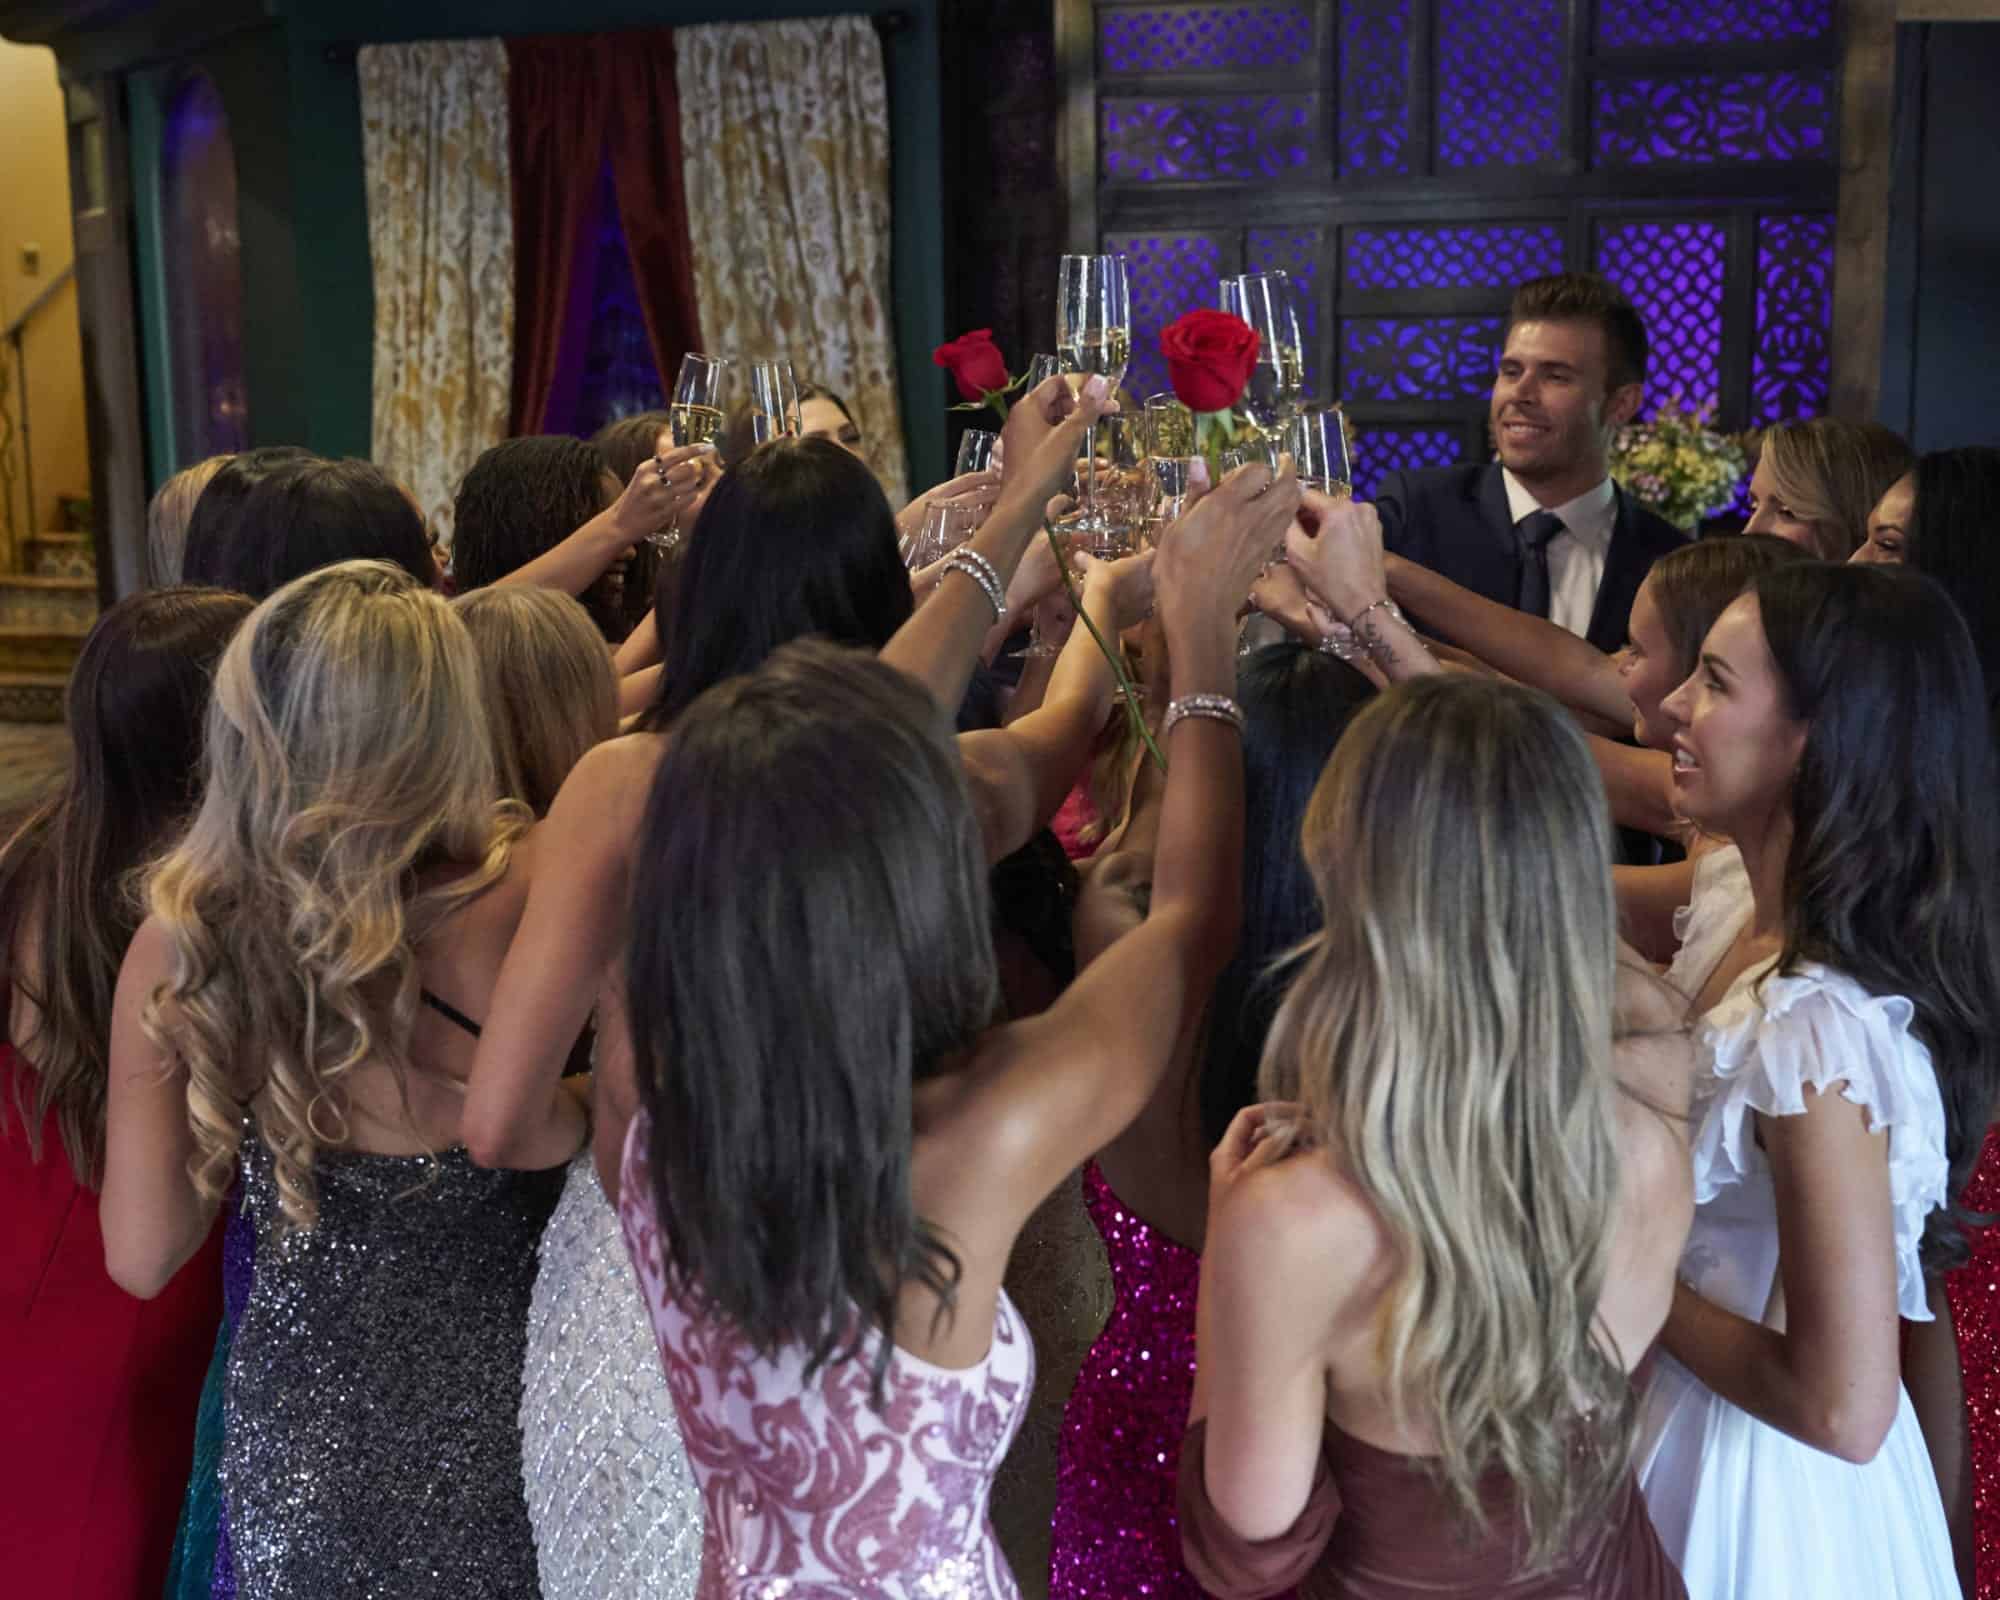 A cut from the recent episode of the show, The Bachelor (credits: ABC)